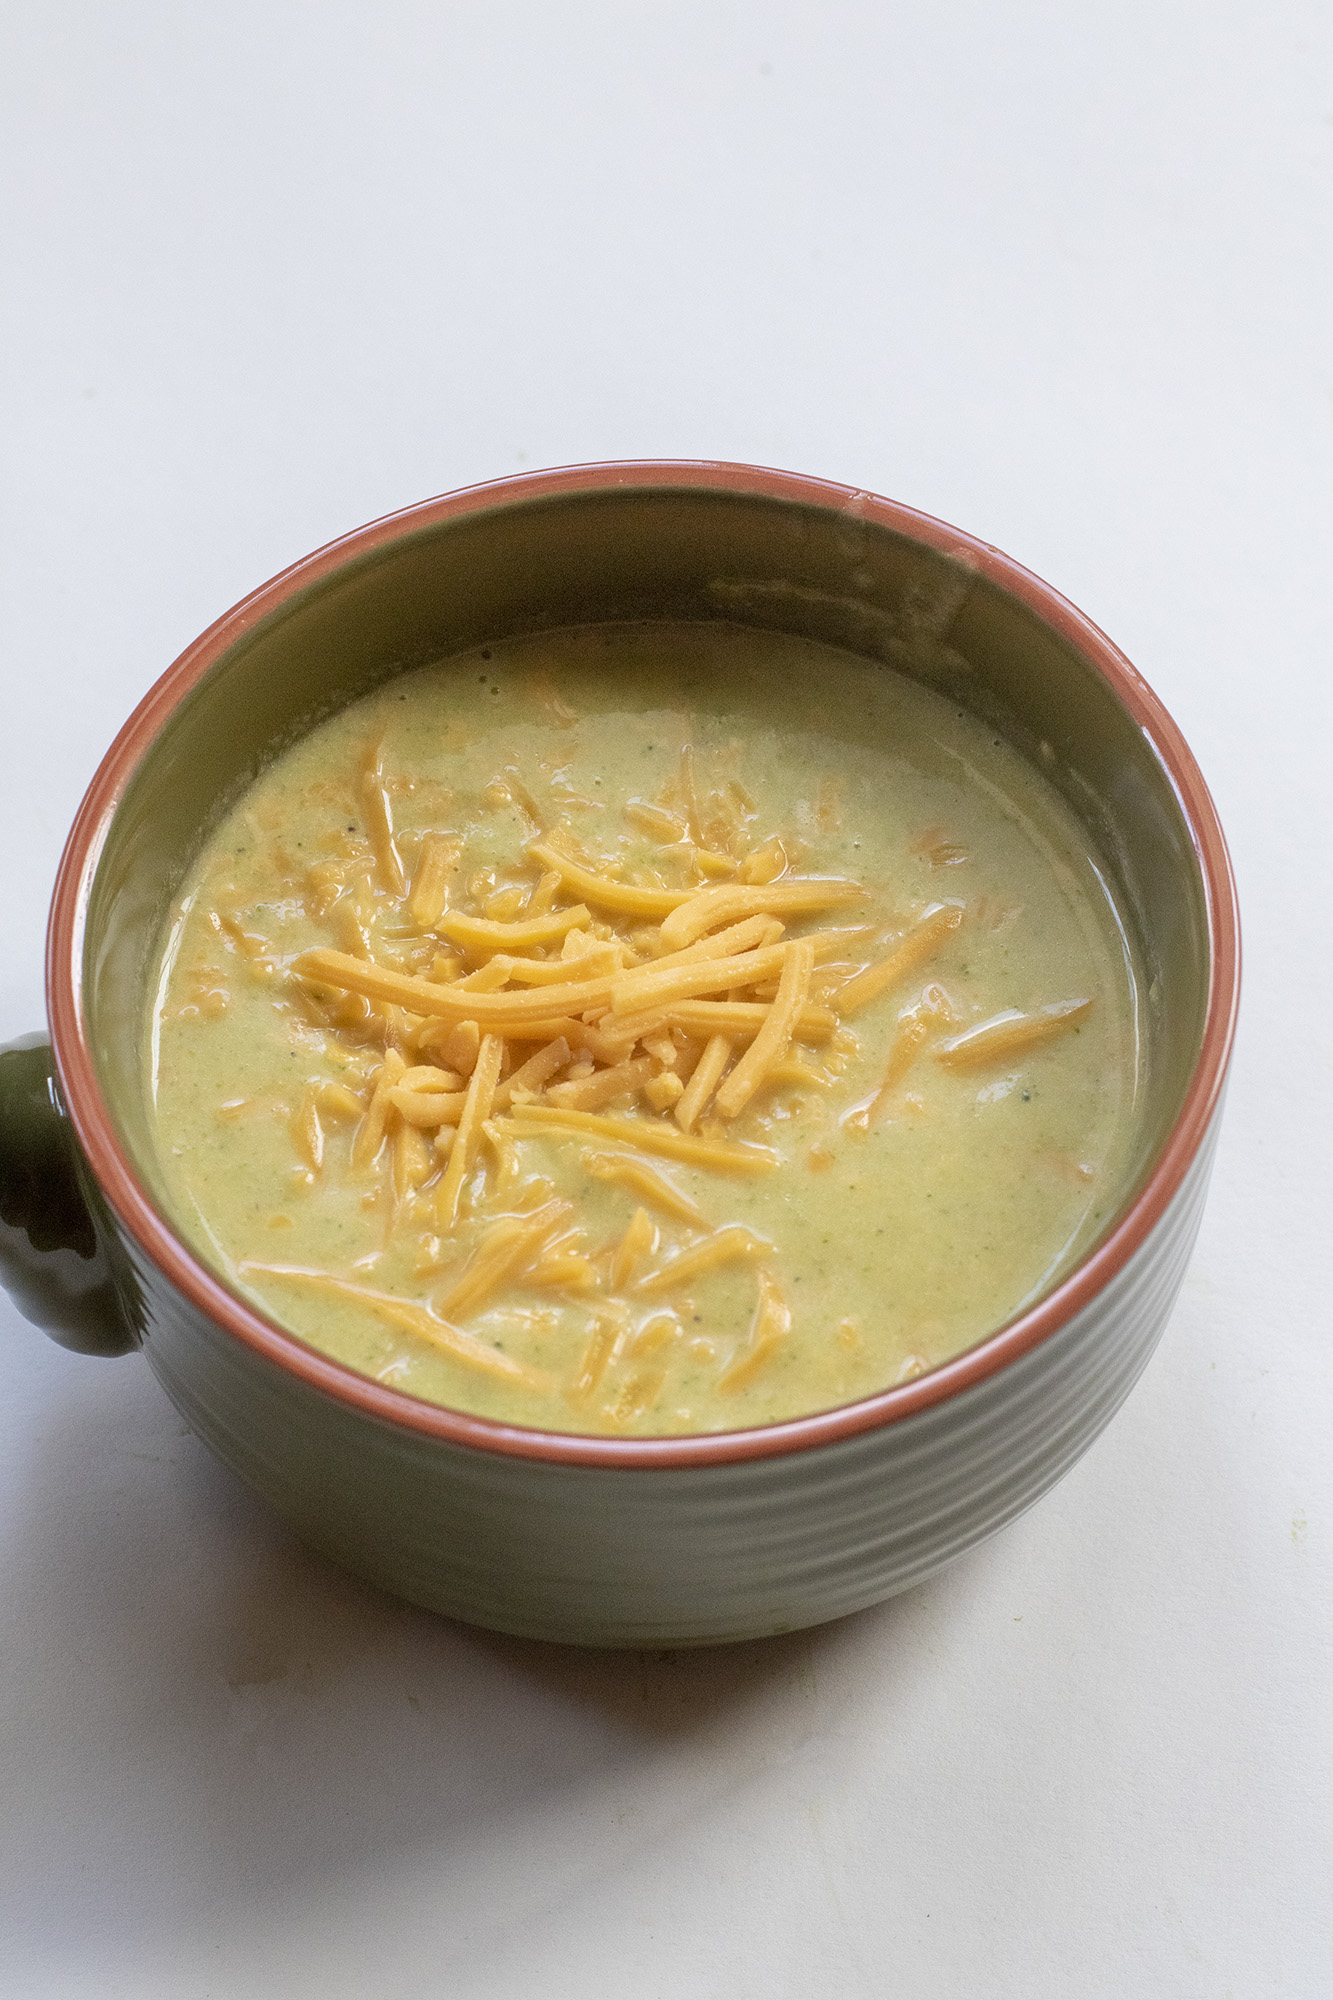 Broccoli Soup in a green bowl topped with shredded cheddar cheese laying on a flat white background.